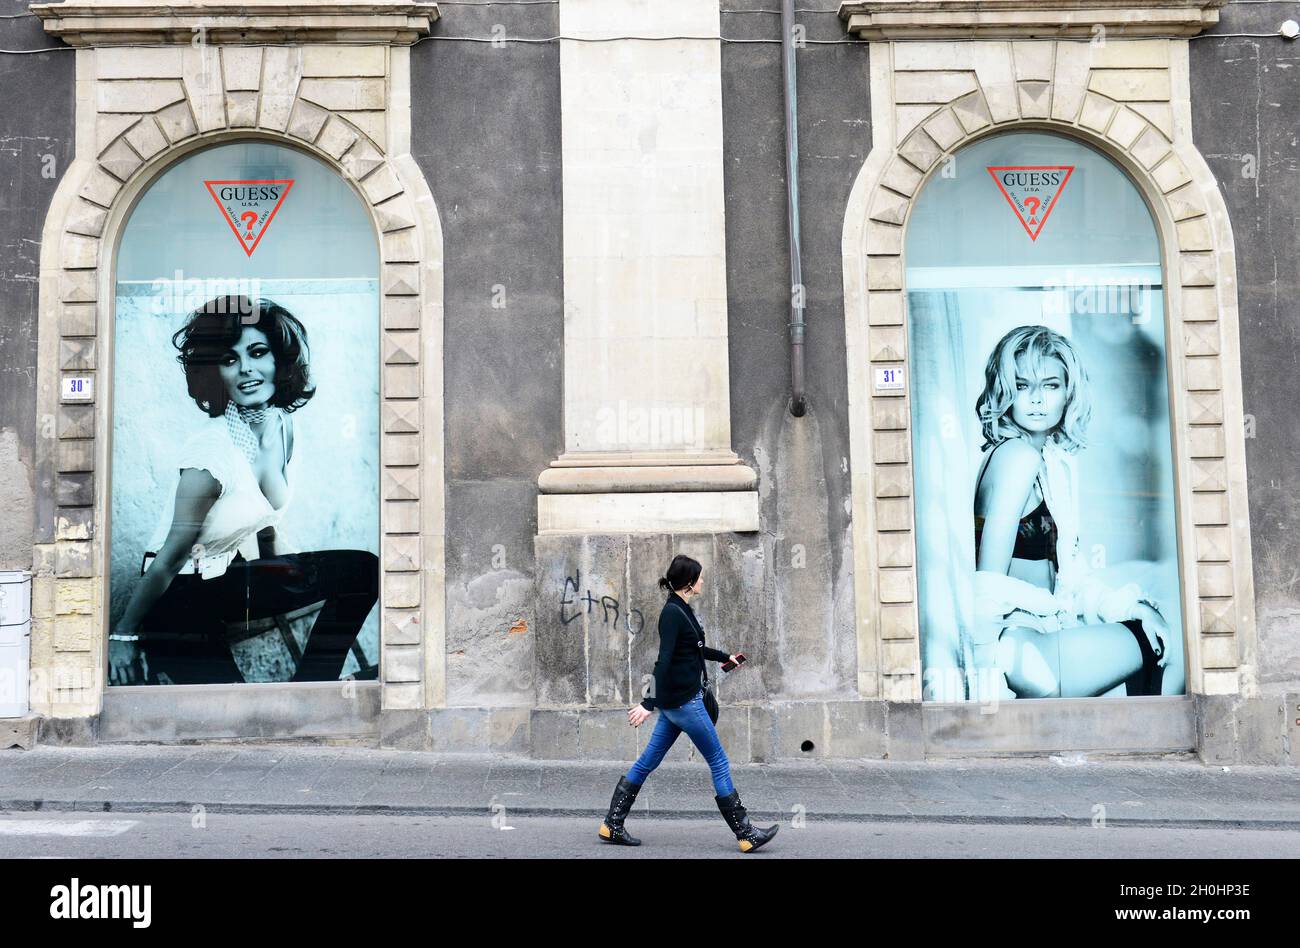 An Italian woman walking under a large advertisement of Guess clothing shop at the Palazzo Tezzano in Catania, Italy. Stock Photo